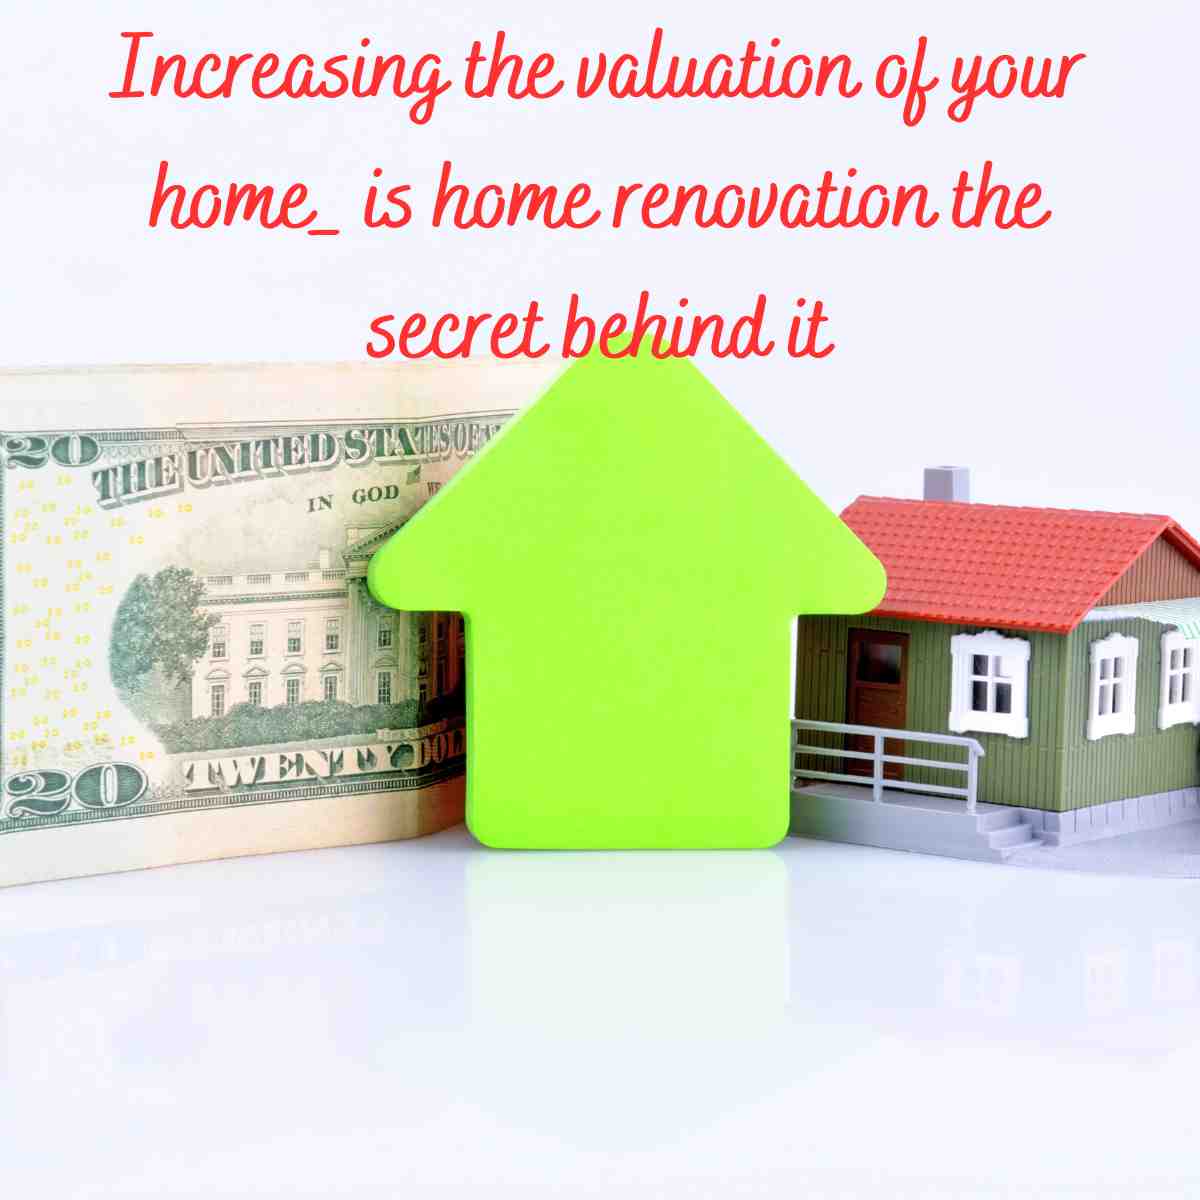 Increasing the valuation of your home_ is home renovation the secret behind it